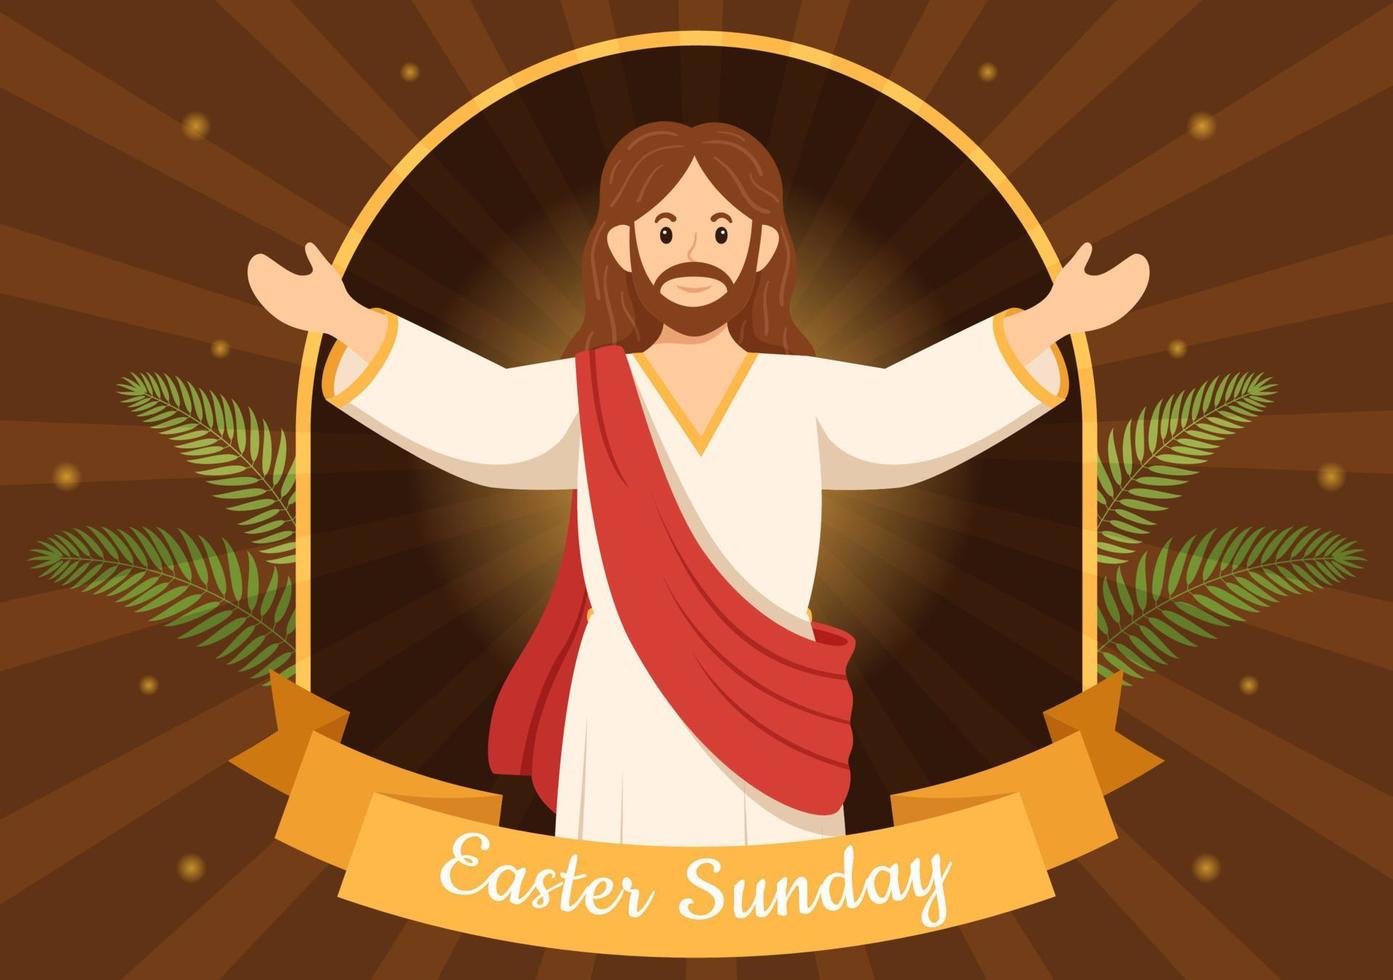 Happy Easter Sunday Day Illustration with Jesus, He is Risen and ...